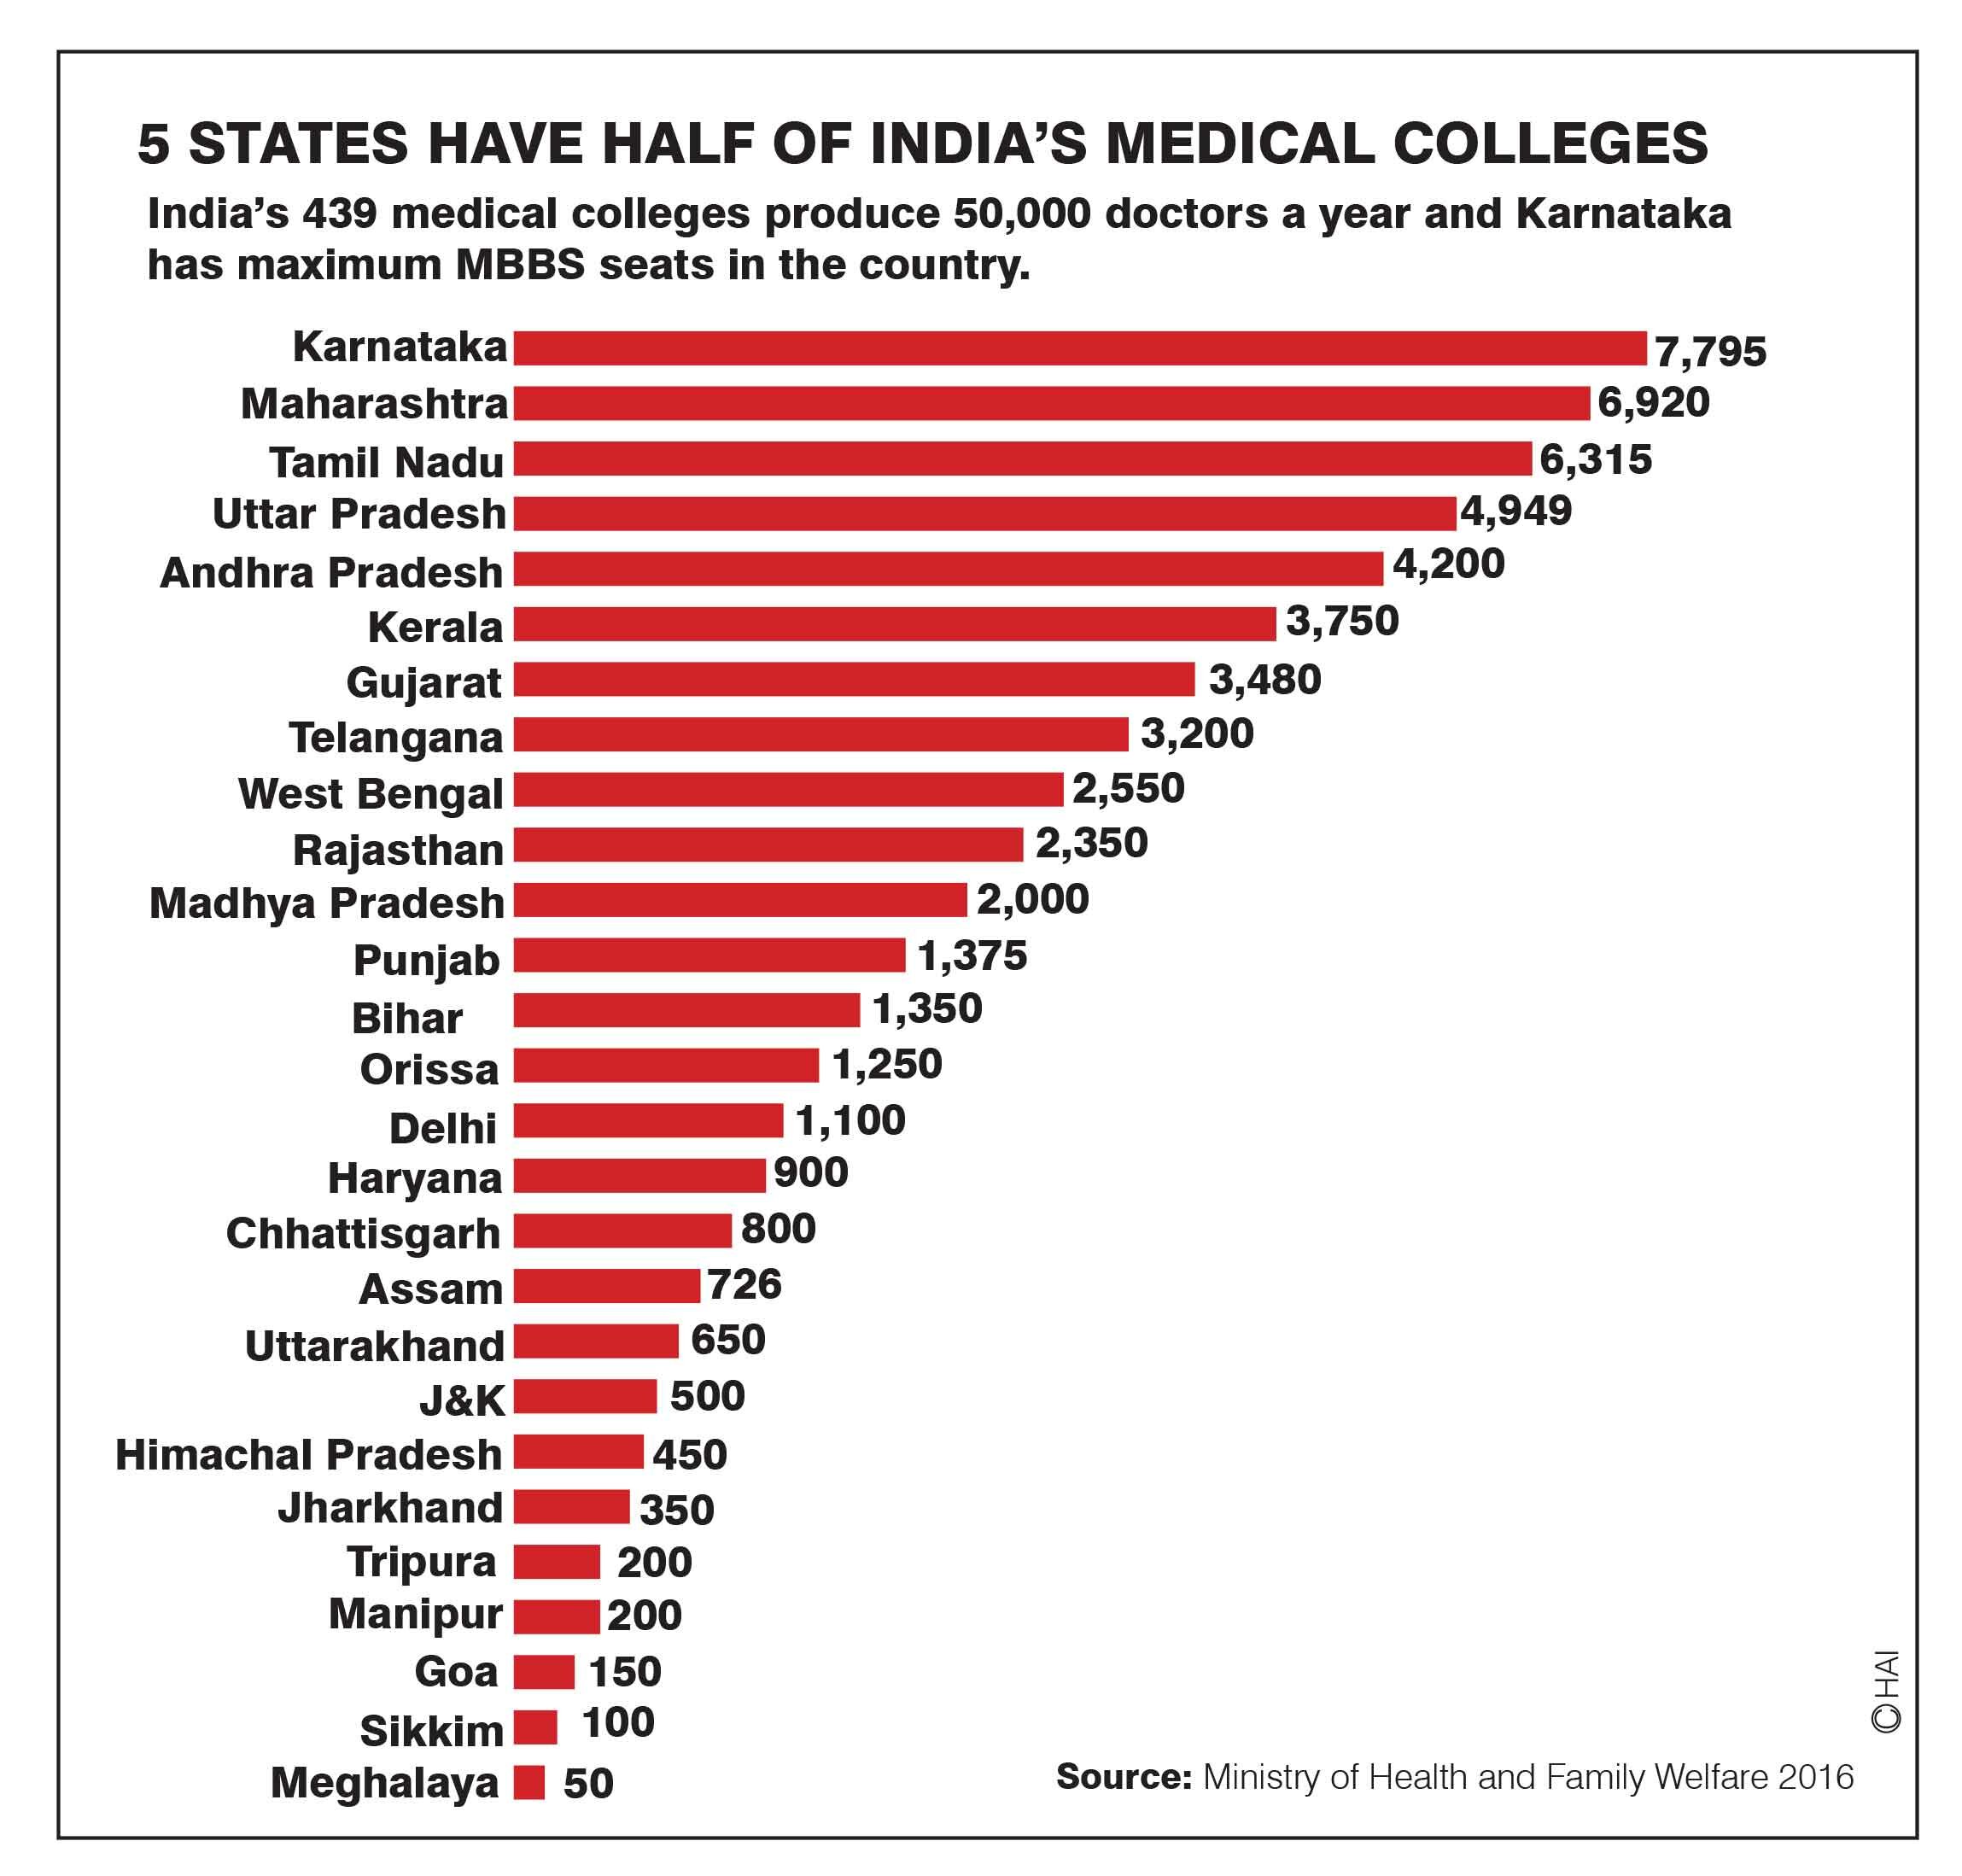 5 states produce 50% of India's doctors